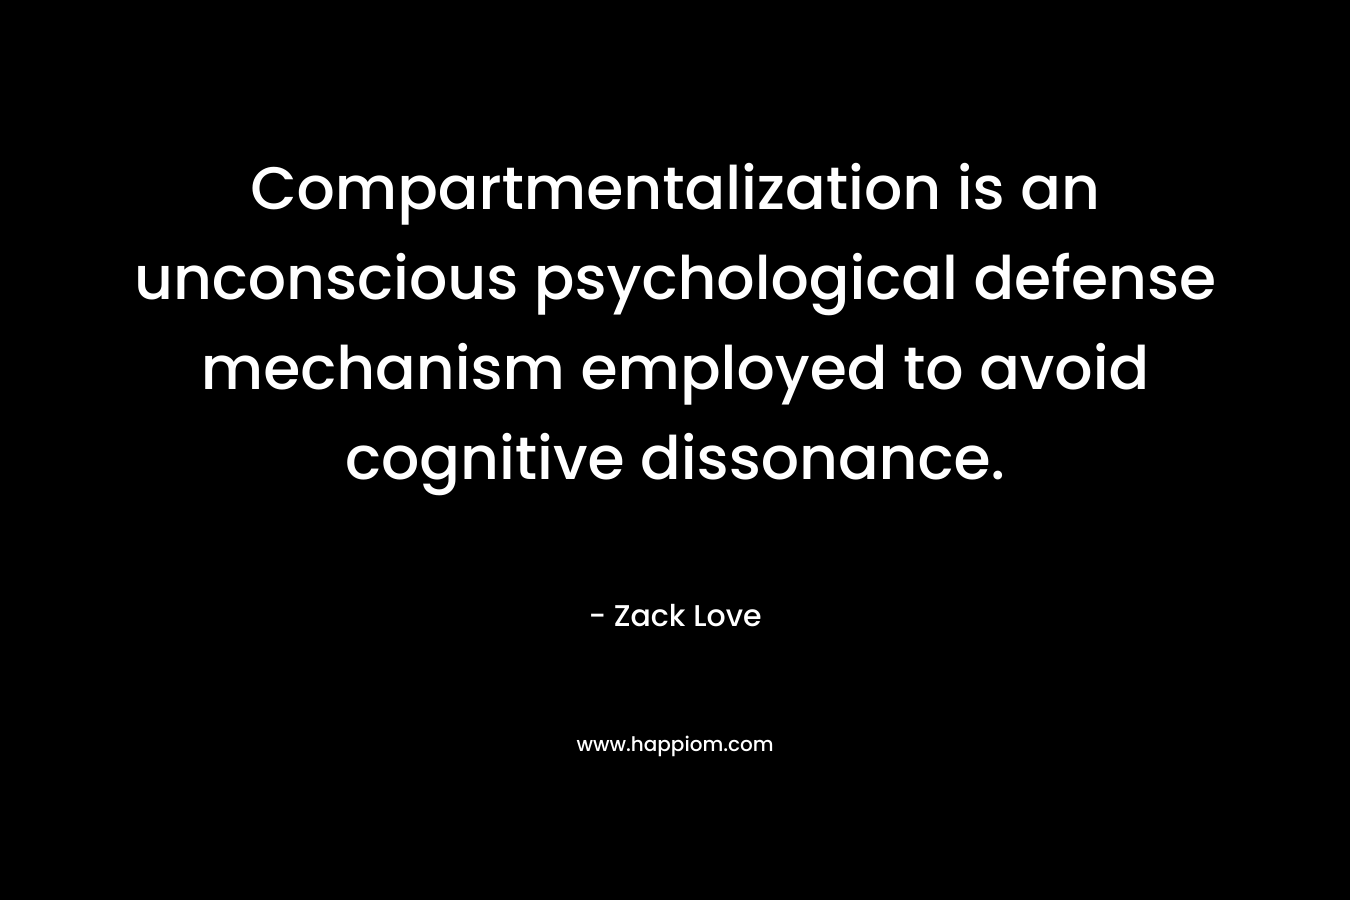 Compartmentalization is an unconscious psychological defense mechanism employed to avoid cognitive dissonance.